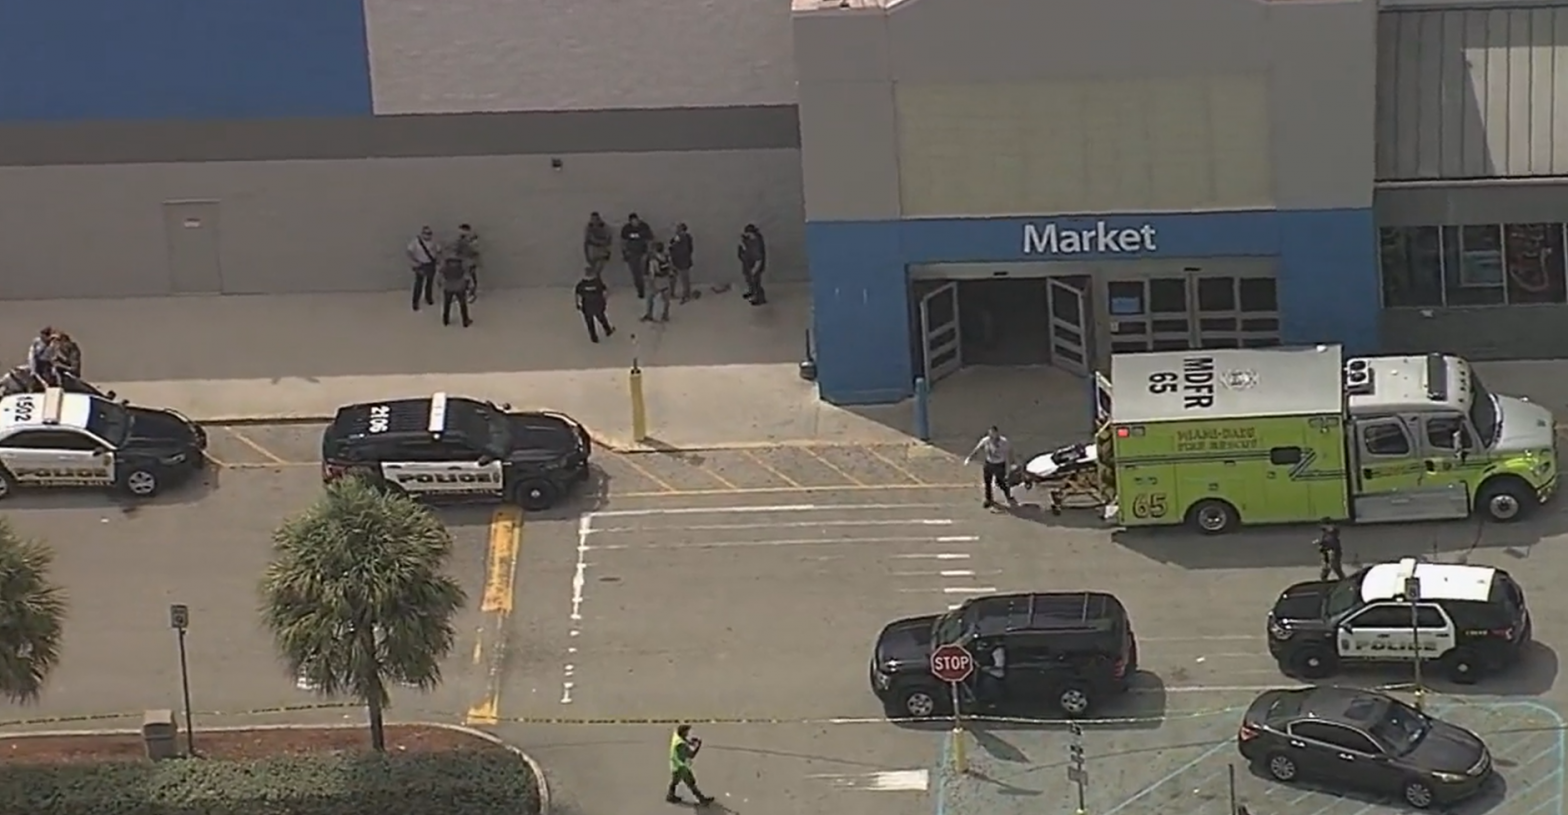 Florida shooting: Two people injured, 1 dead in attack inside Walmart as police reach the scene | Watch video